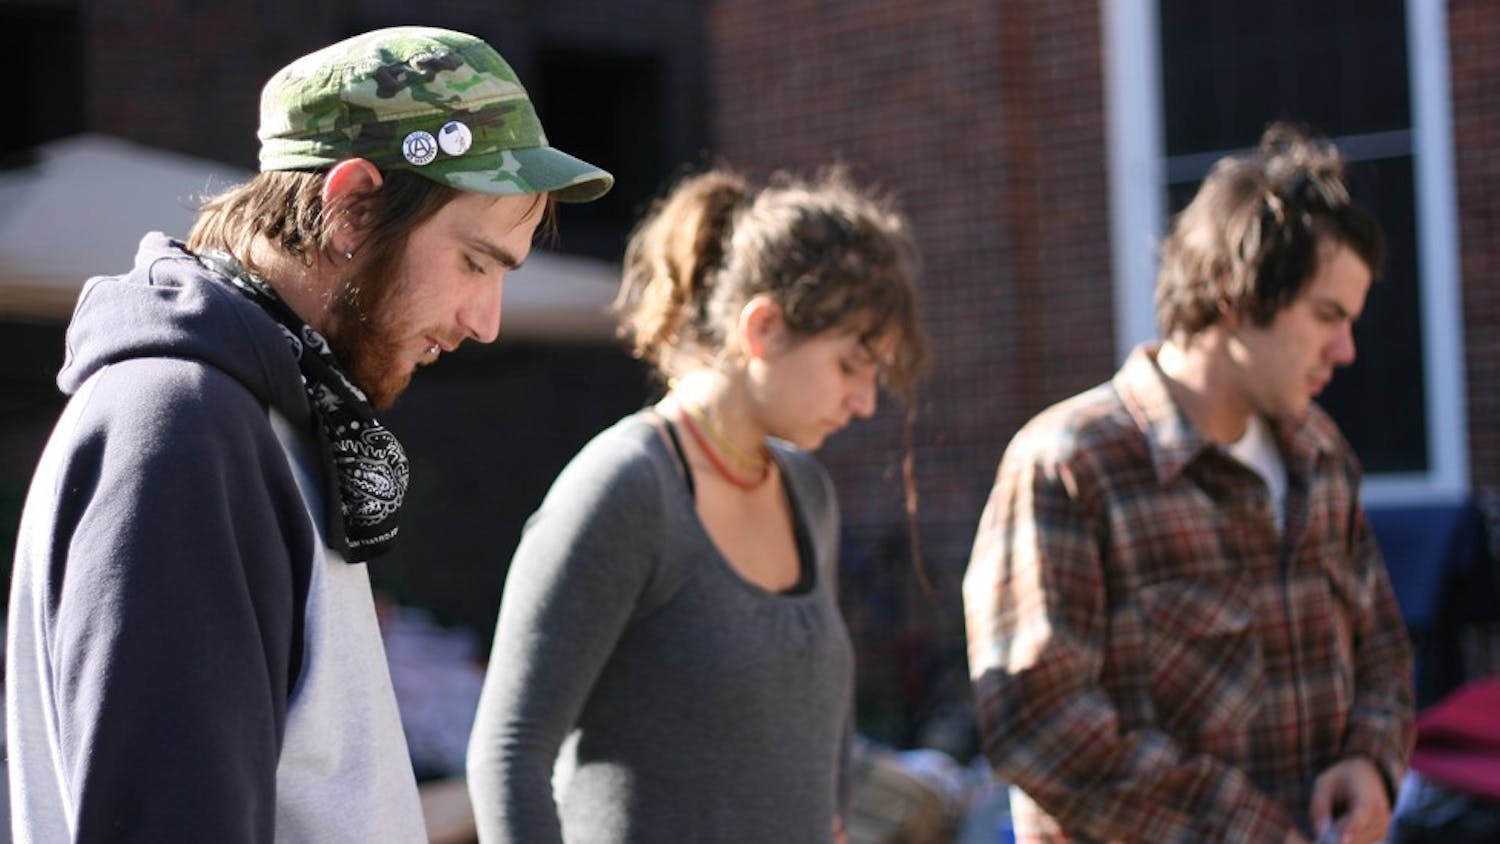 John K., Kassandra Ofray and Kyle Aronstam are thinking of how to arrange the wooden shipping pallats which will help warm Occupy Chapel Hill during the colder winter months. John K. explains, "When it rains concrete doesn't insulate. The wooden platforms are just a prototype." Vincent Gonzalez says that "plans for now are insulation, blankets and wooden shipping pallats. 